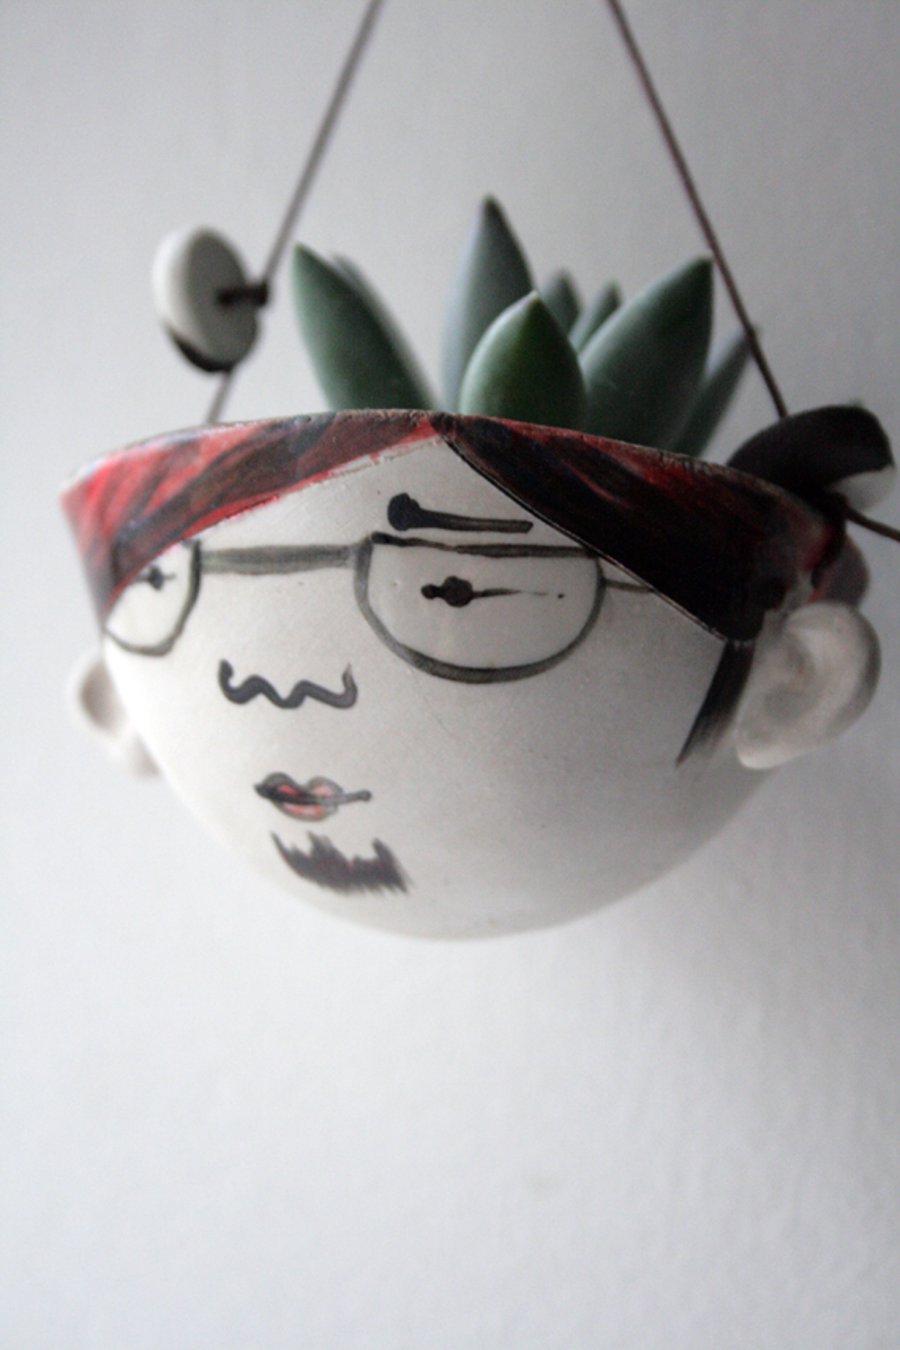 Lennon-stoneware ceramic hanging planter for succulents or air plants